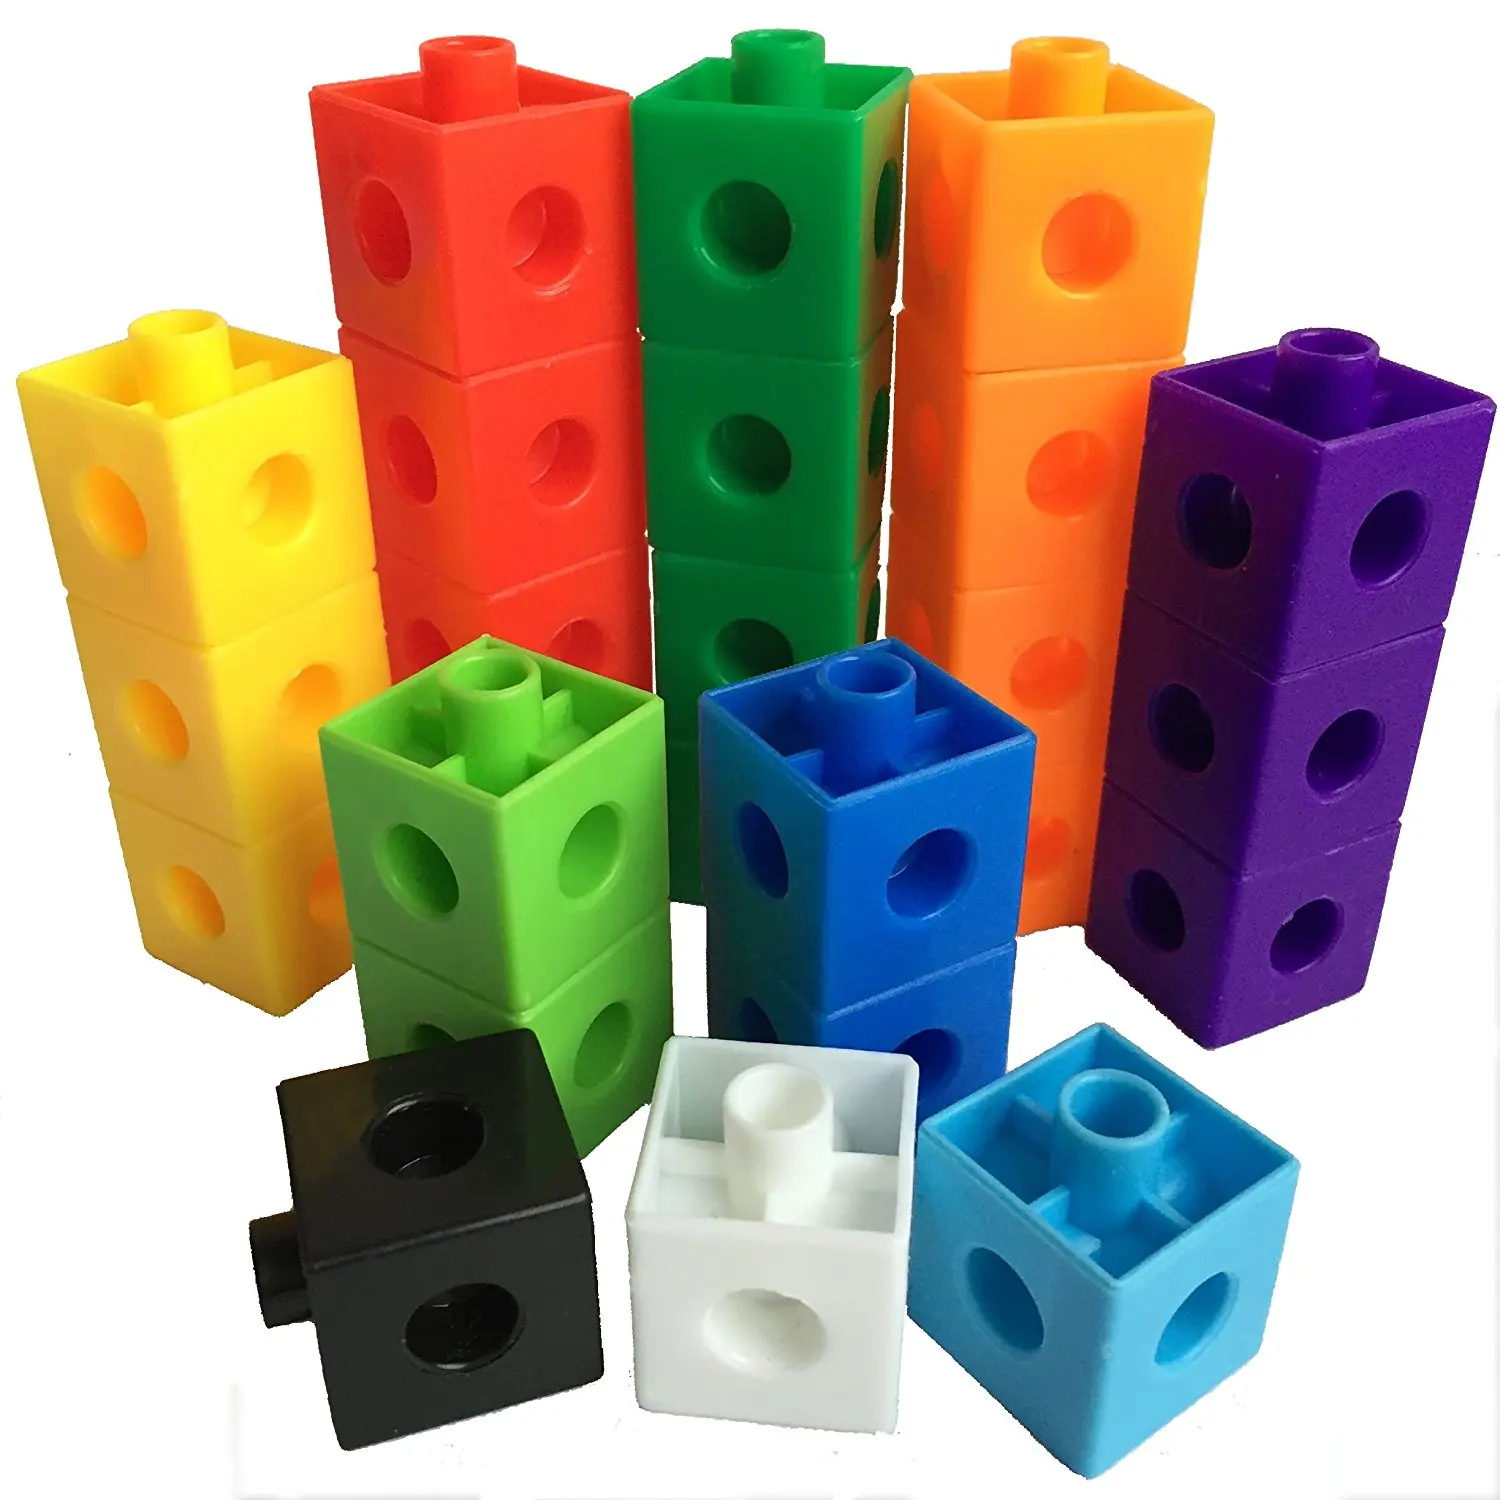 100 Pieces Snap Cubes Interlocking Math Learning for Kids Teaching Materials 